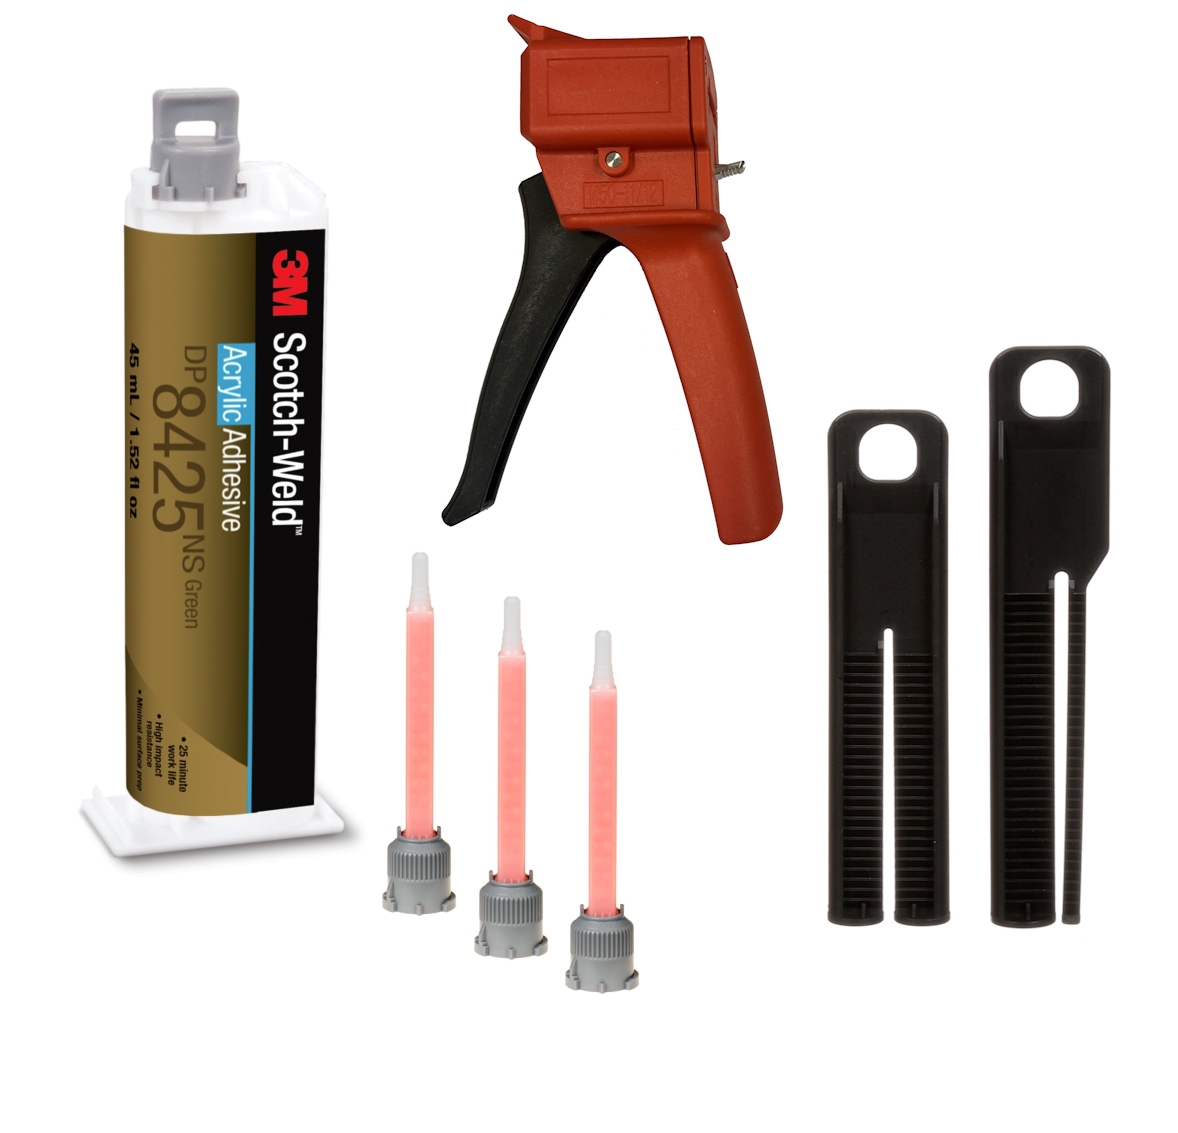 Starter set: 1x 3M Scotch-Weld 2-component construction adhesive EPX System DP8425 NS, green, 45 ml 1x S-K-S hand tool for EPX 38 to 50 ml cartridges incl. feed piston 2:1 &amp; 10:1, 3x mixing nozzle